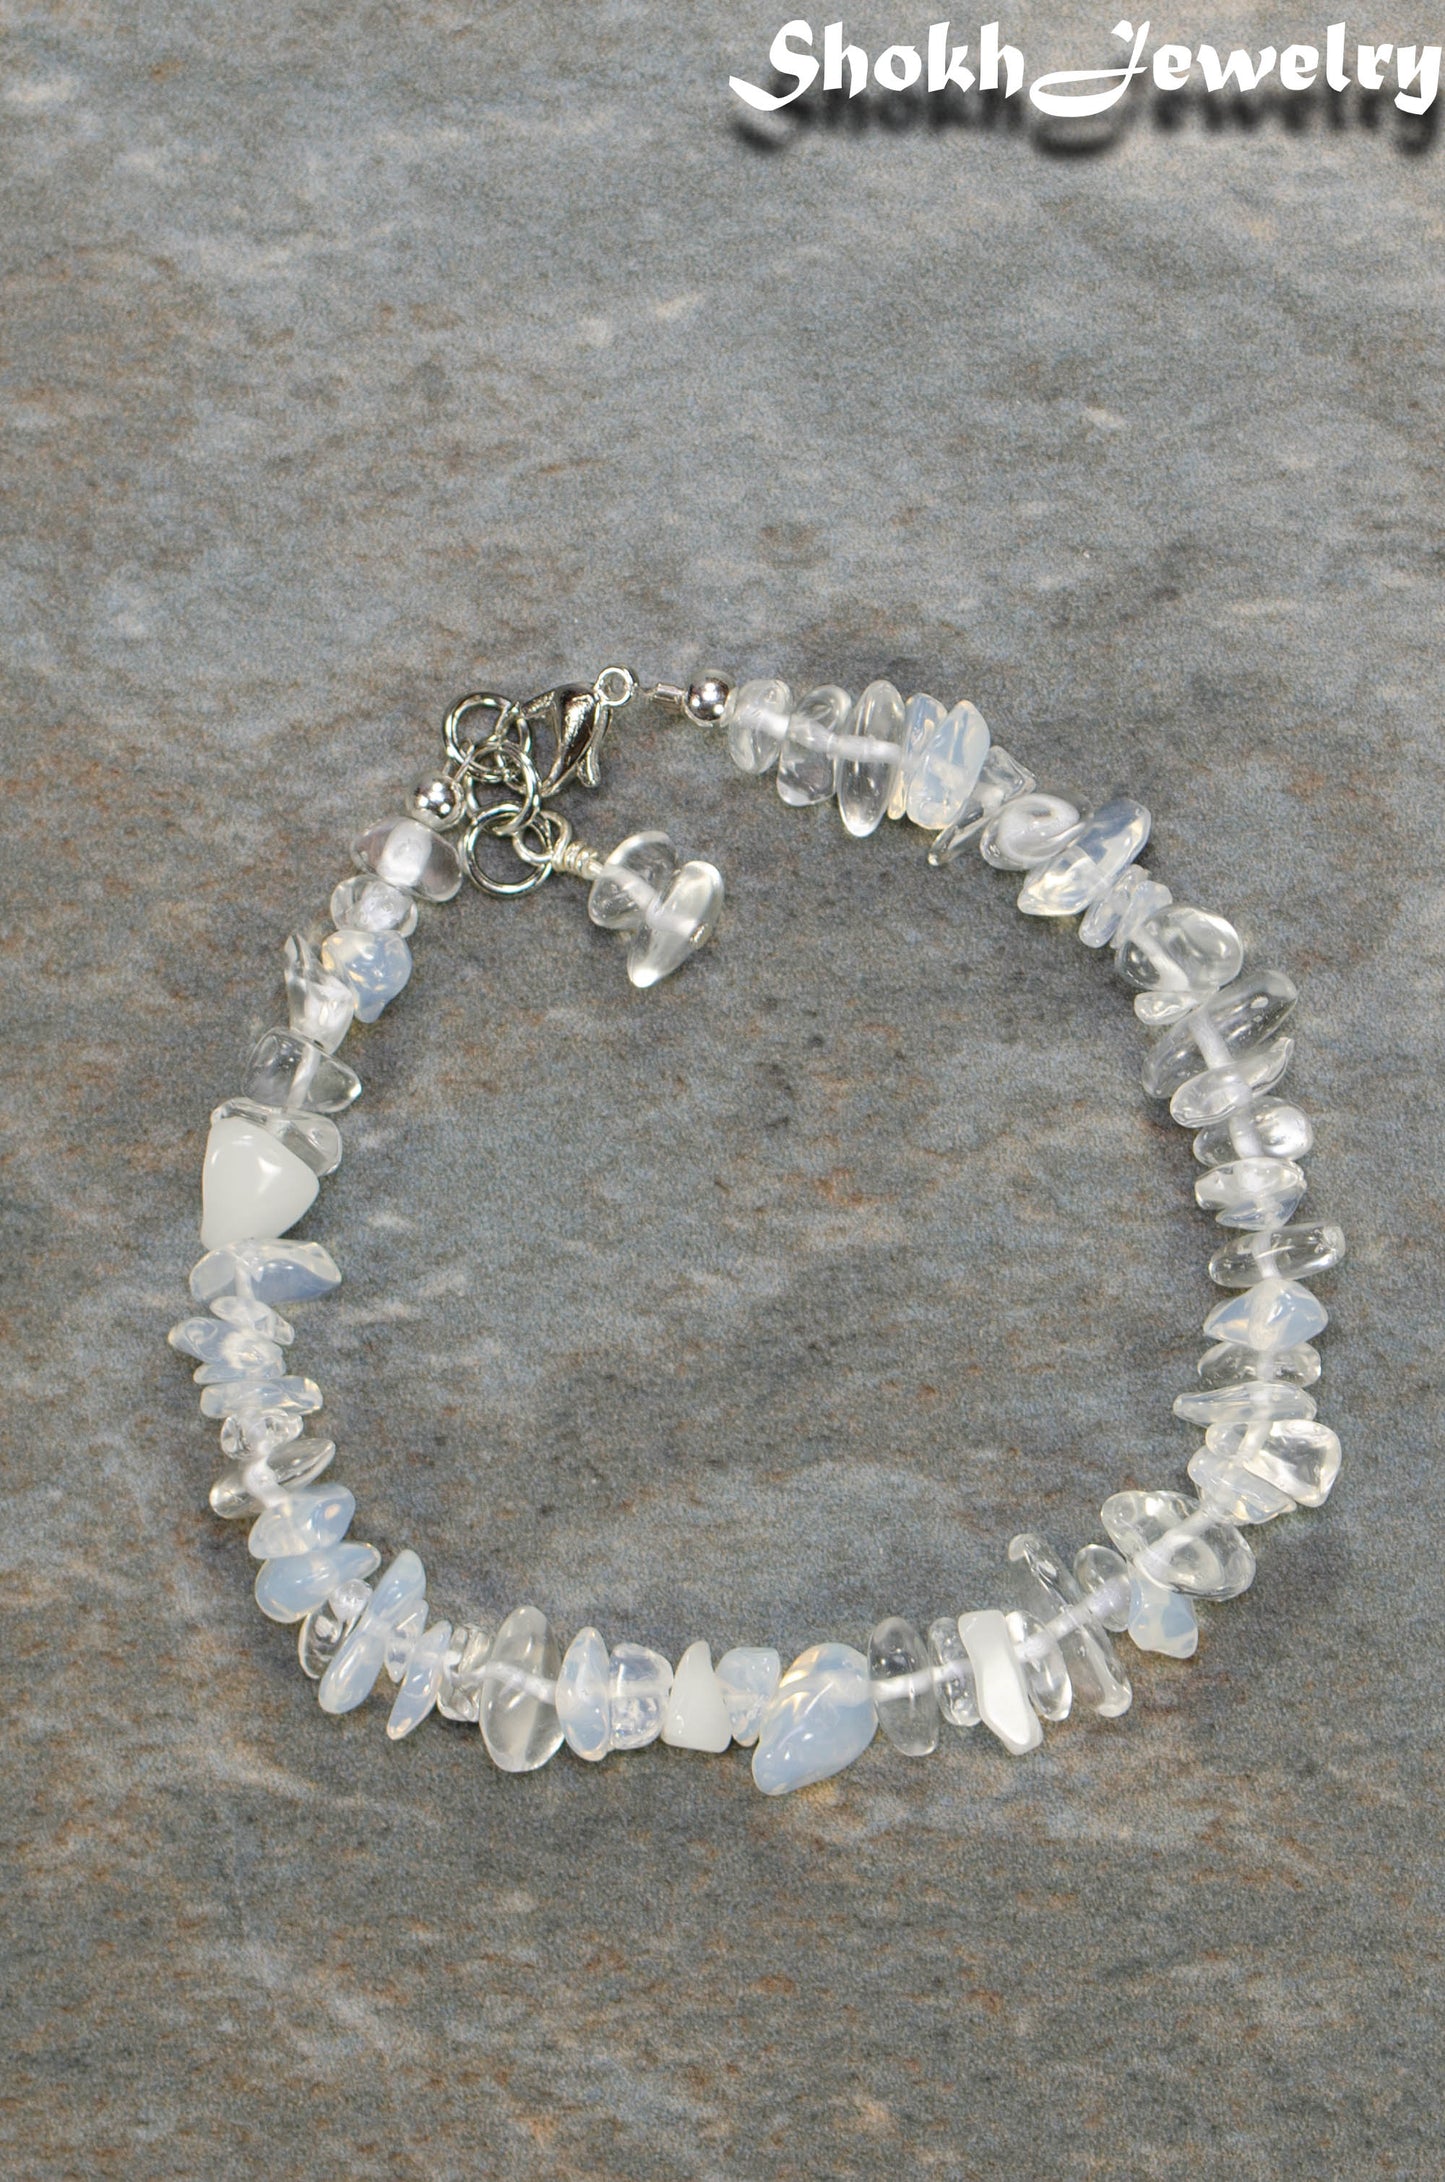 Top view of Natural White Opal Crystal Chip Bracelet.